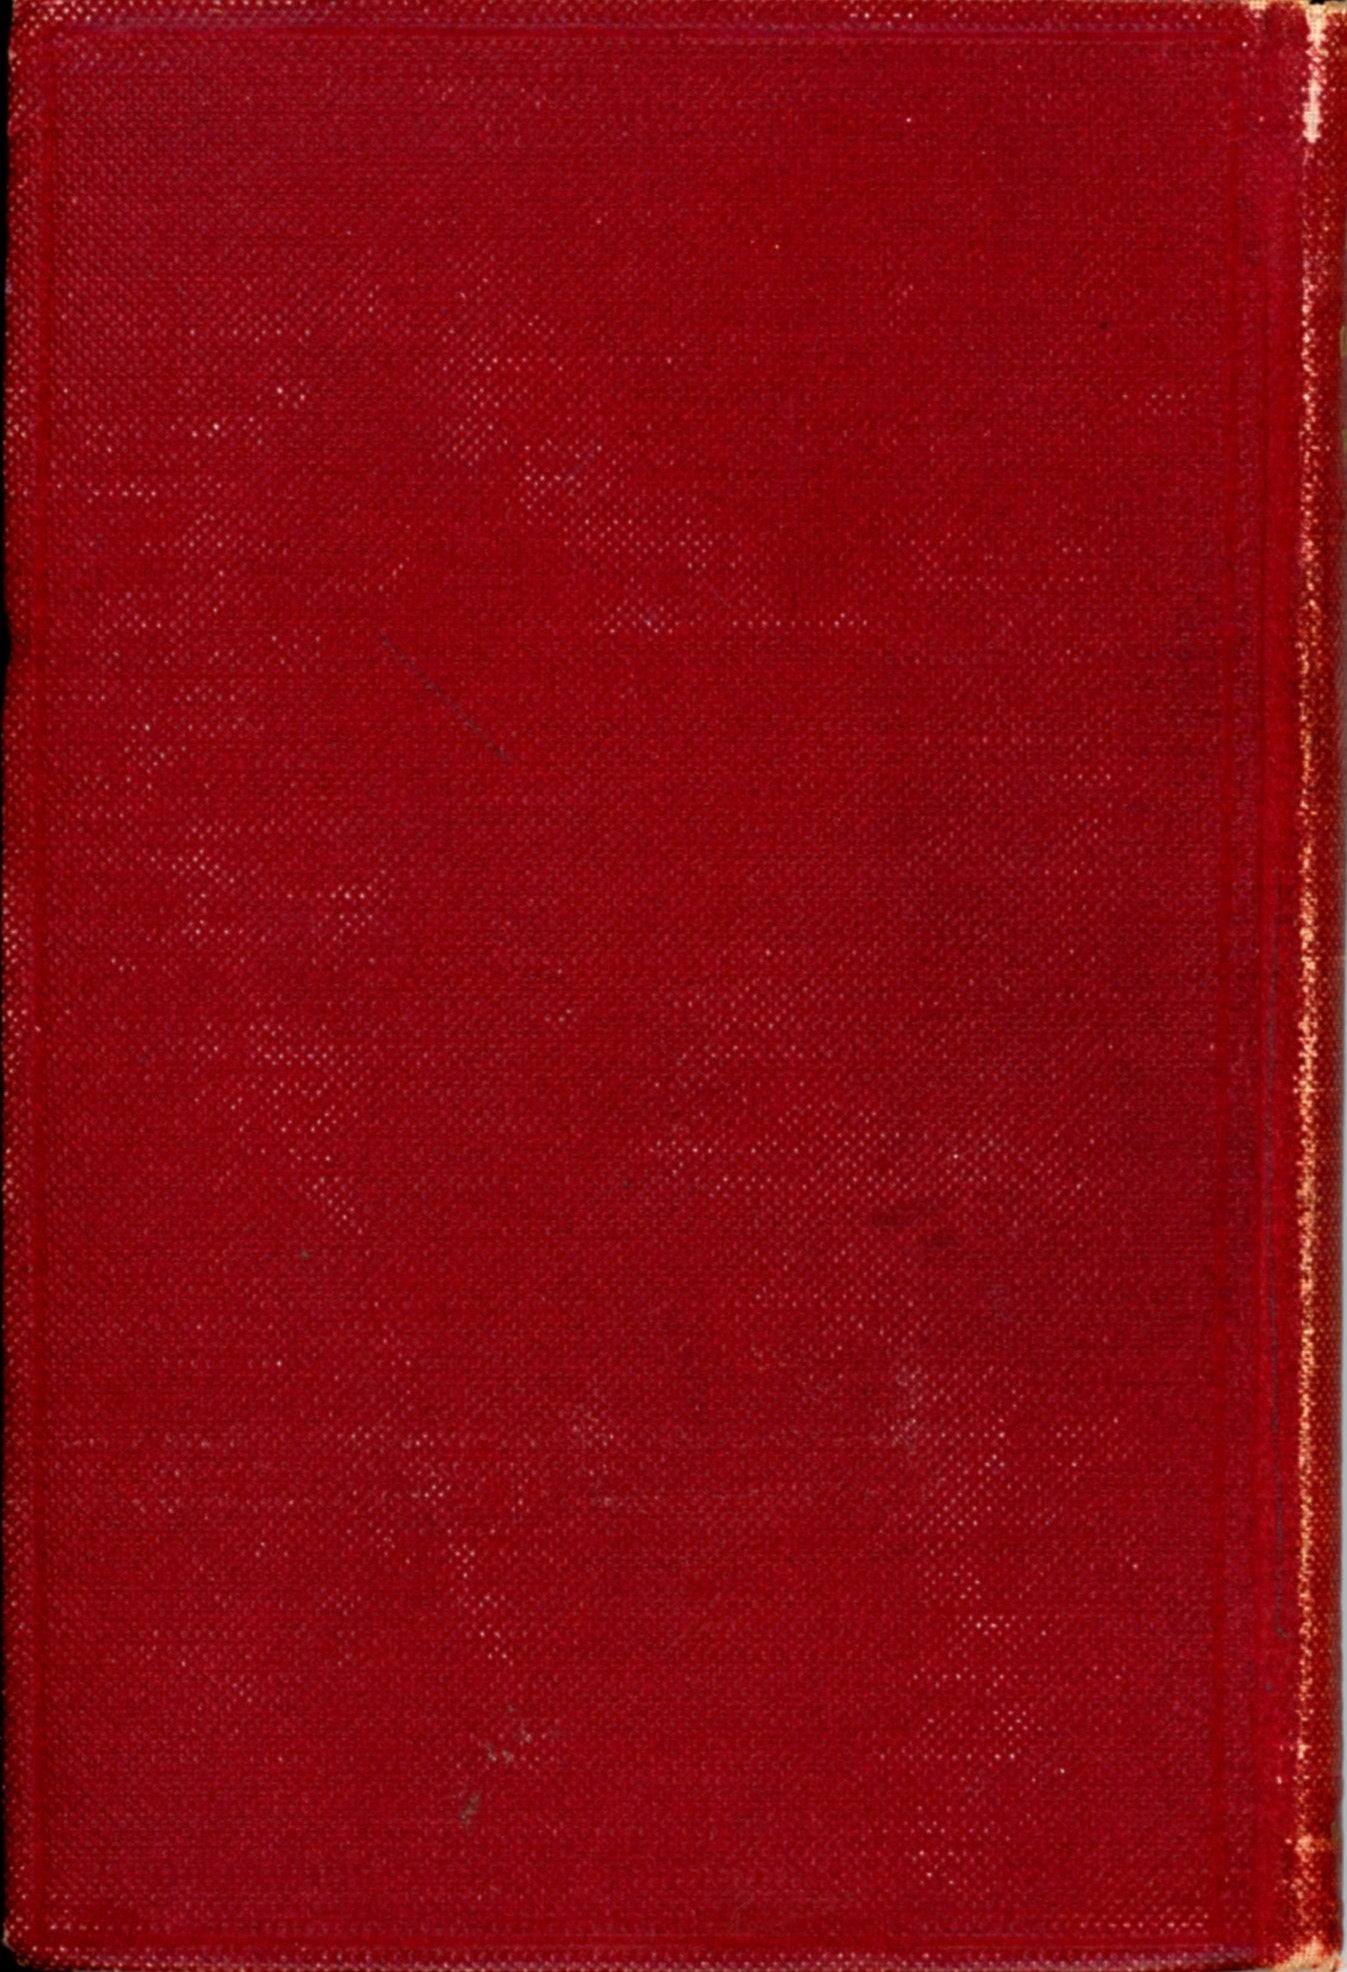 Handbook of Composition by Edwin C. Woolley ©1907 First Edition